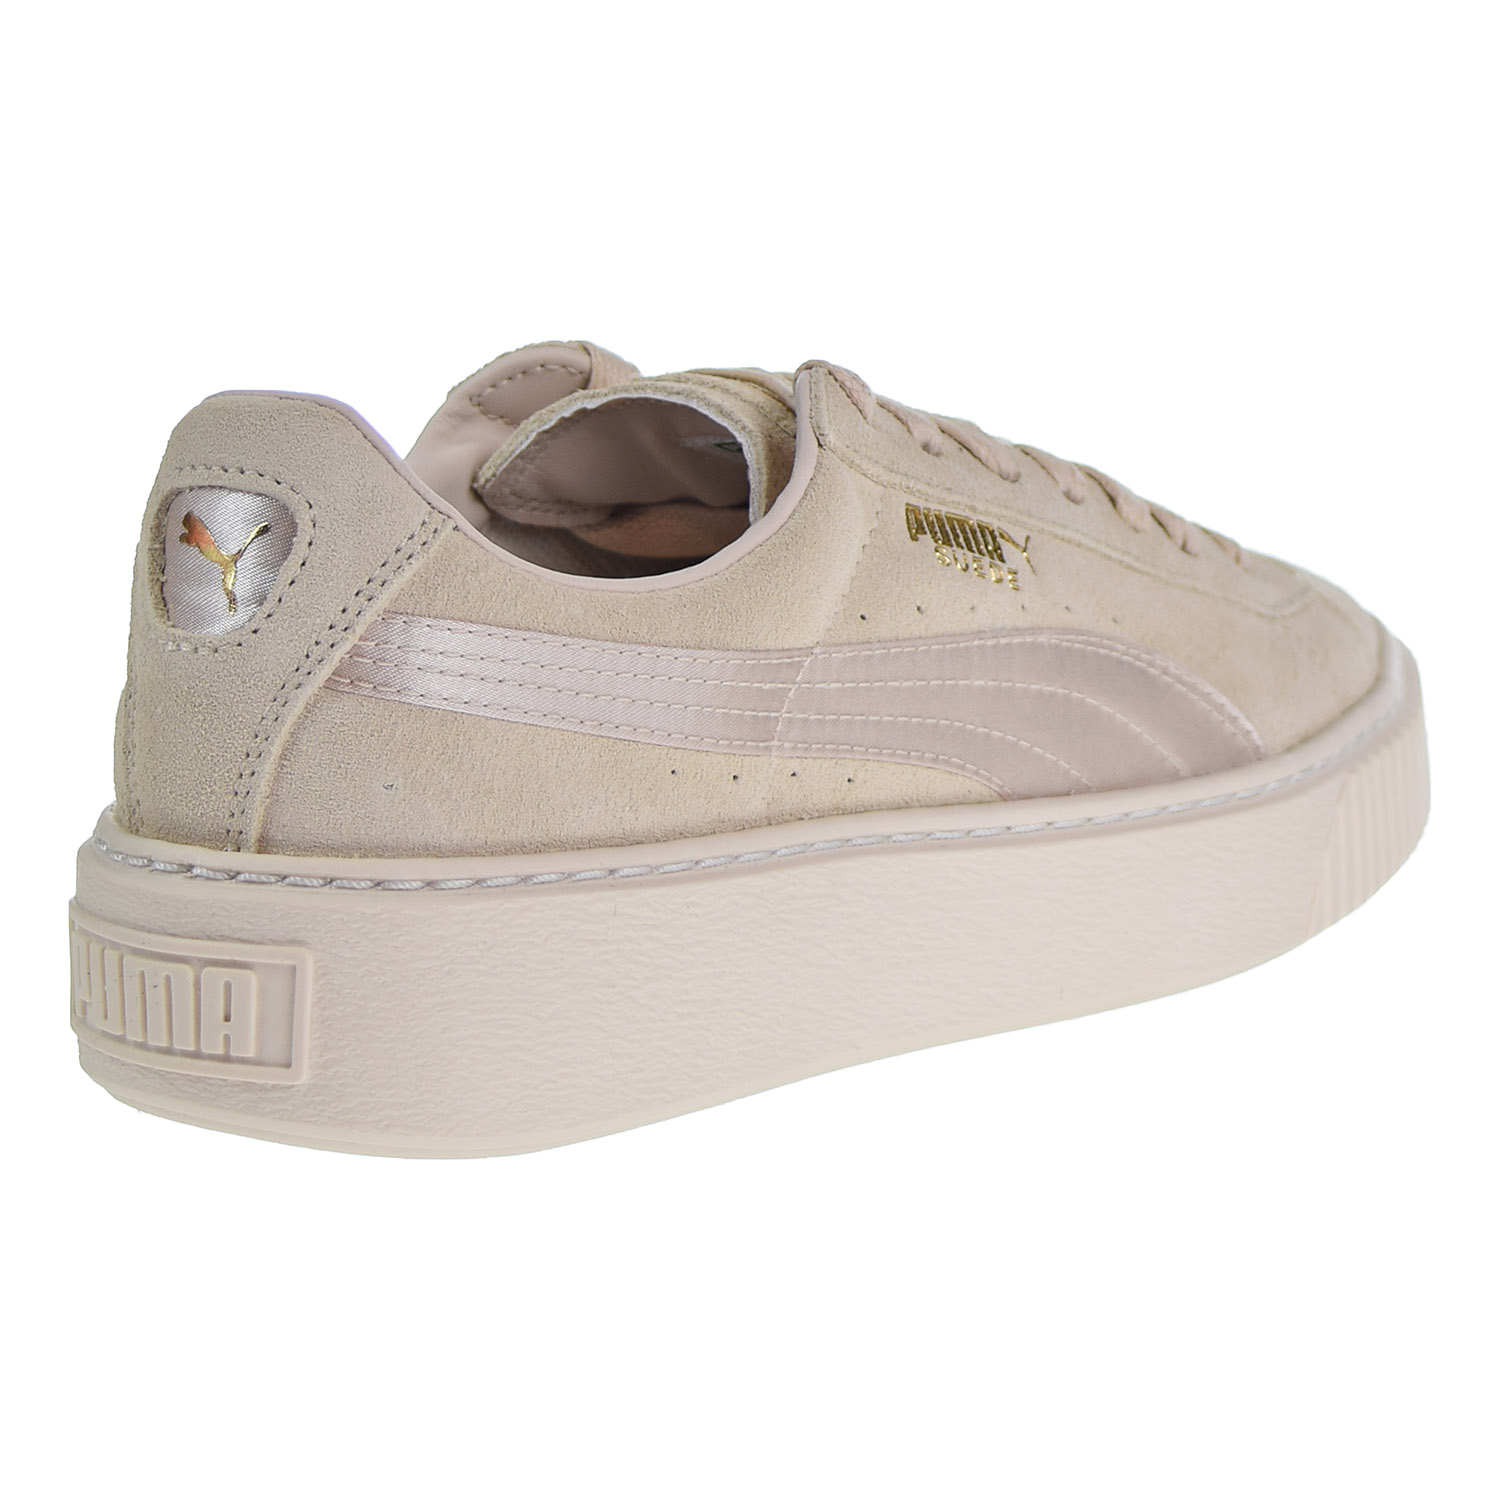 Sneakers Pink Tint-White-Gold 365828-02 